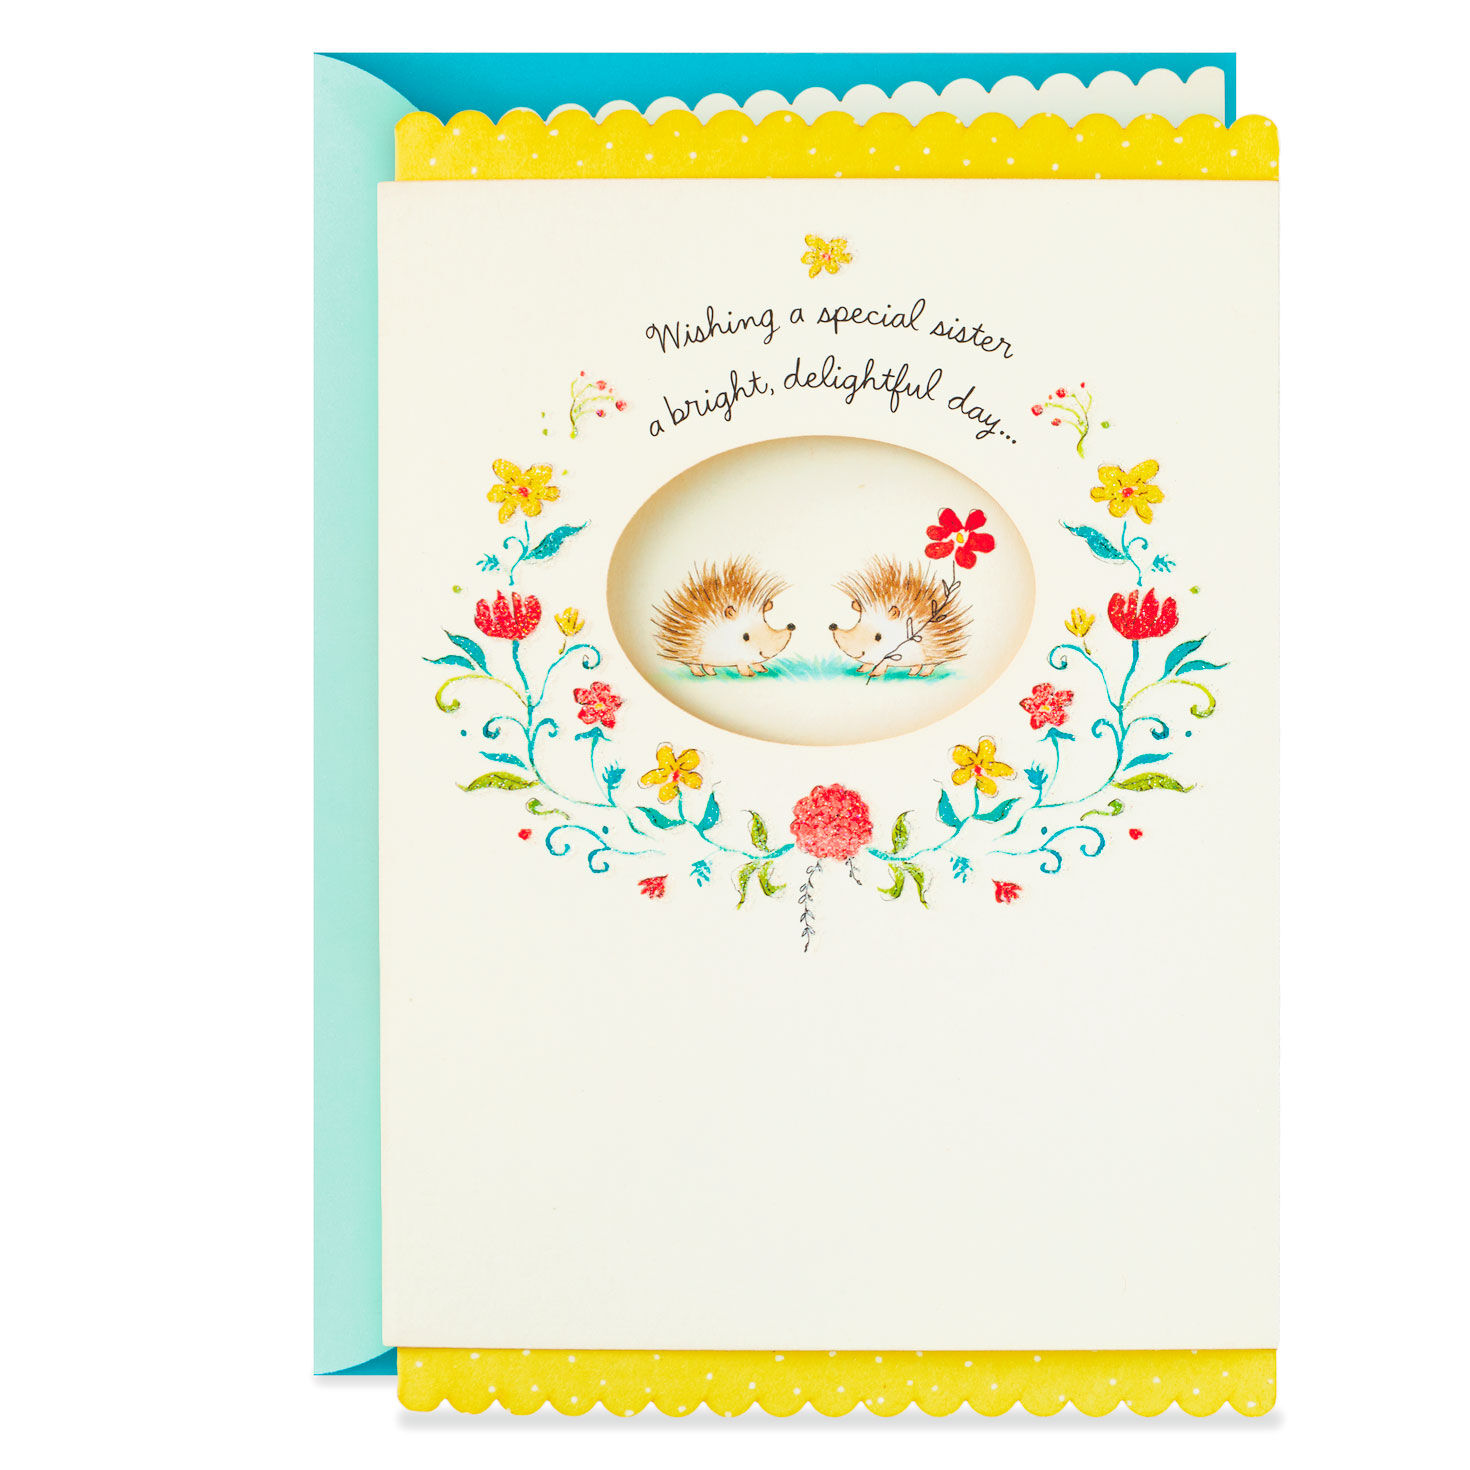 Wish for Happiness Birthday Card for Sister for only USD 3.99 | Hallmark